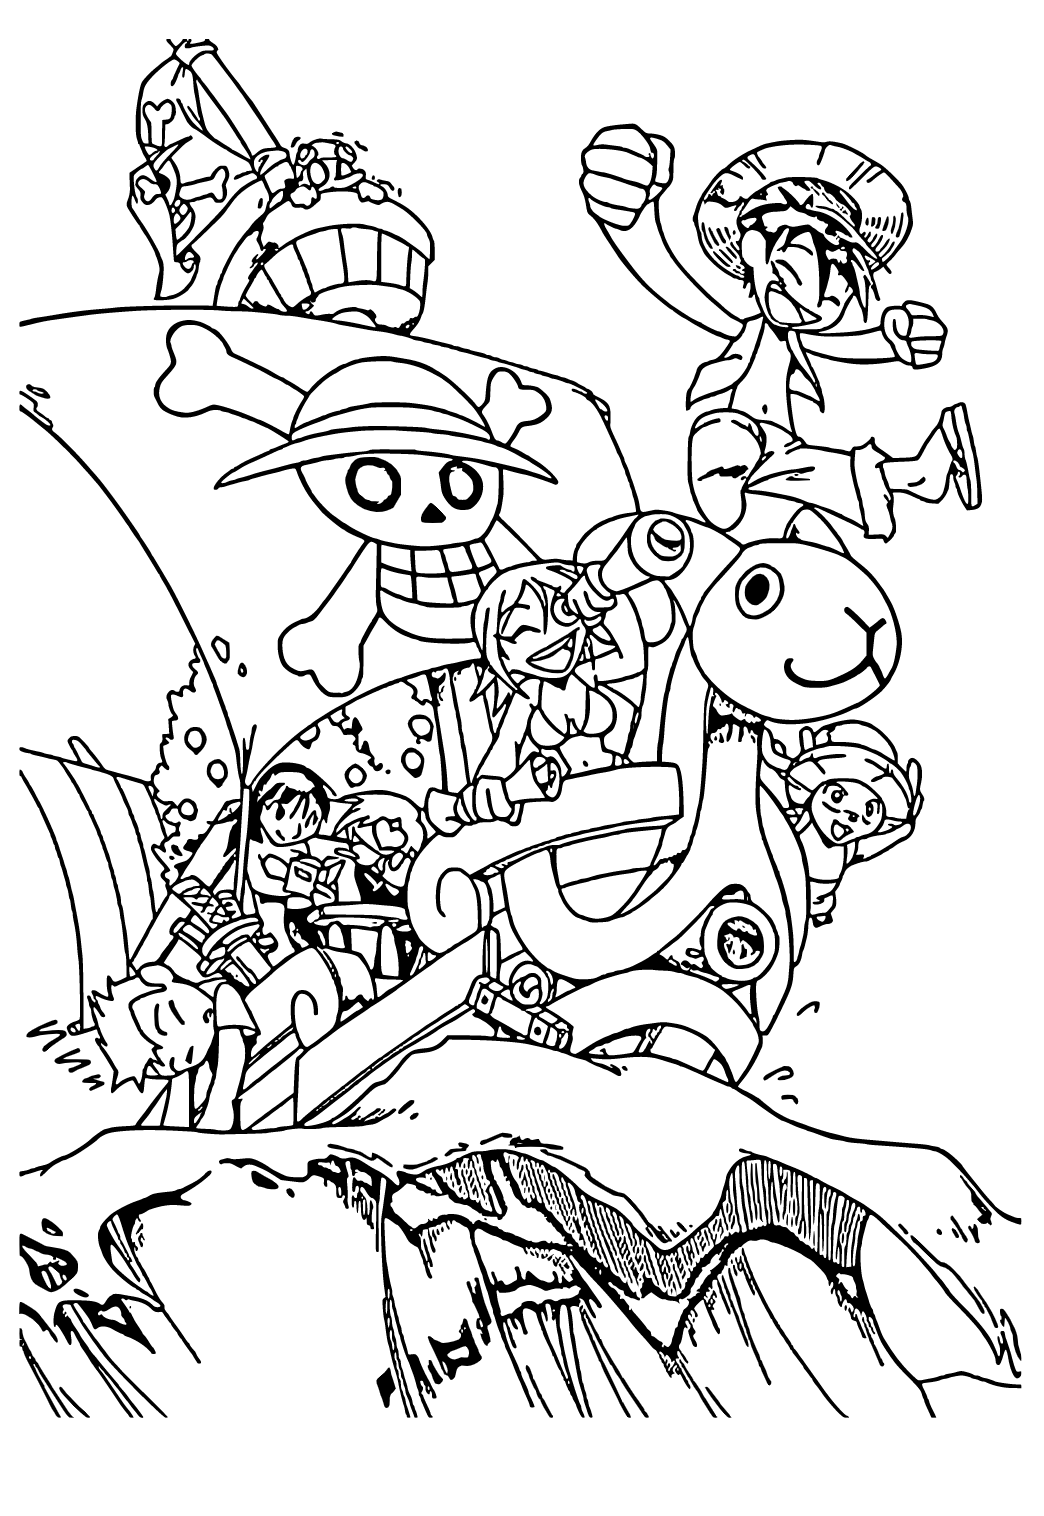 Gacha Life Boy Pirate Coloring Pages - Get Coloring Pages